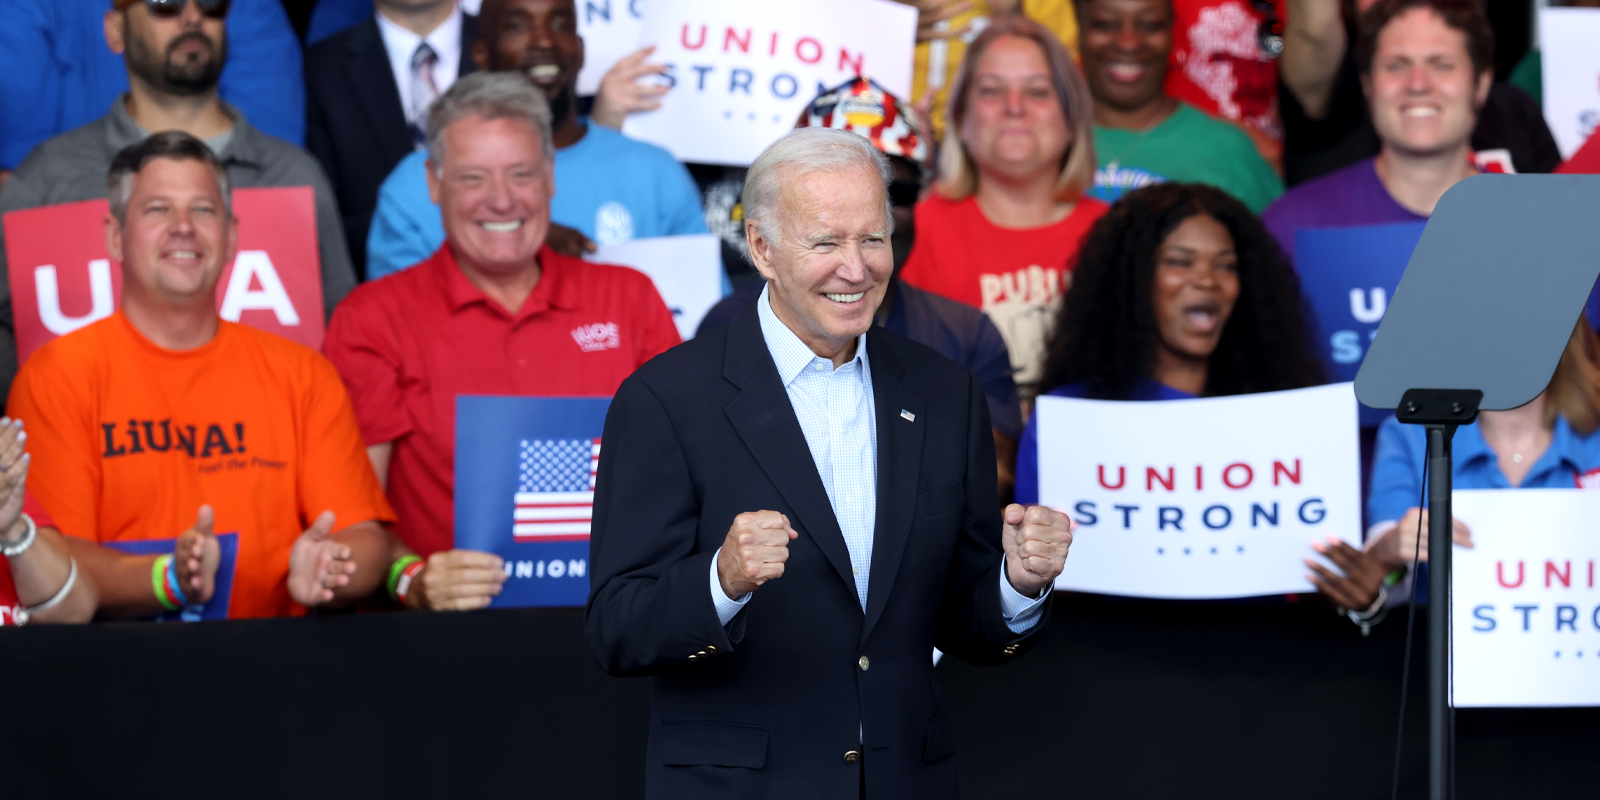 Saunders: President Biden is ‘most pro-union, pro-worker president of our lifetimes’